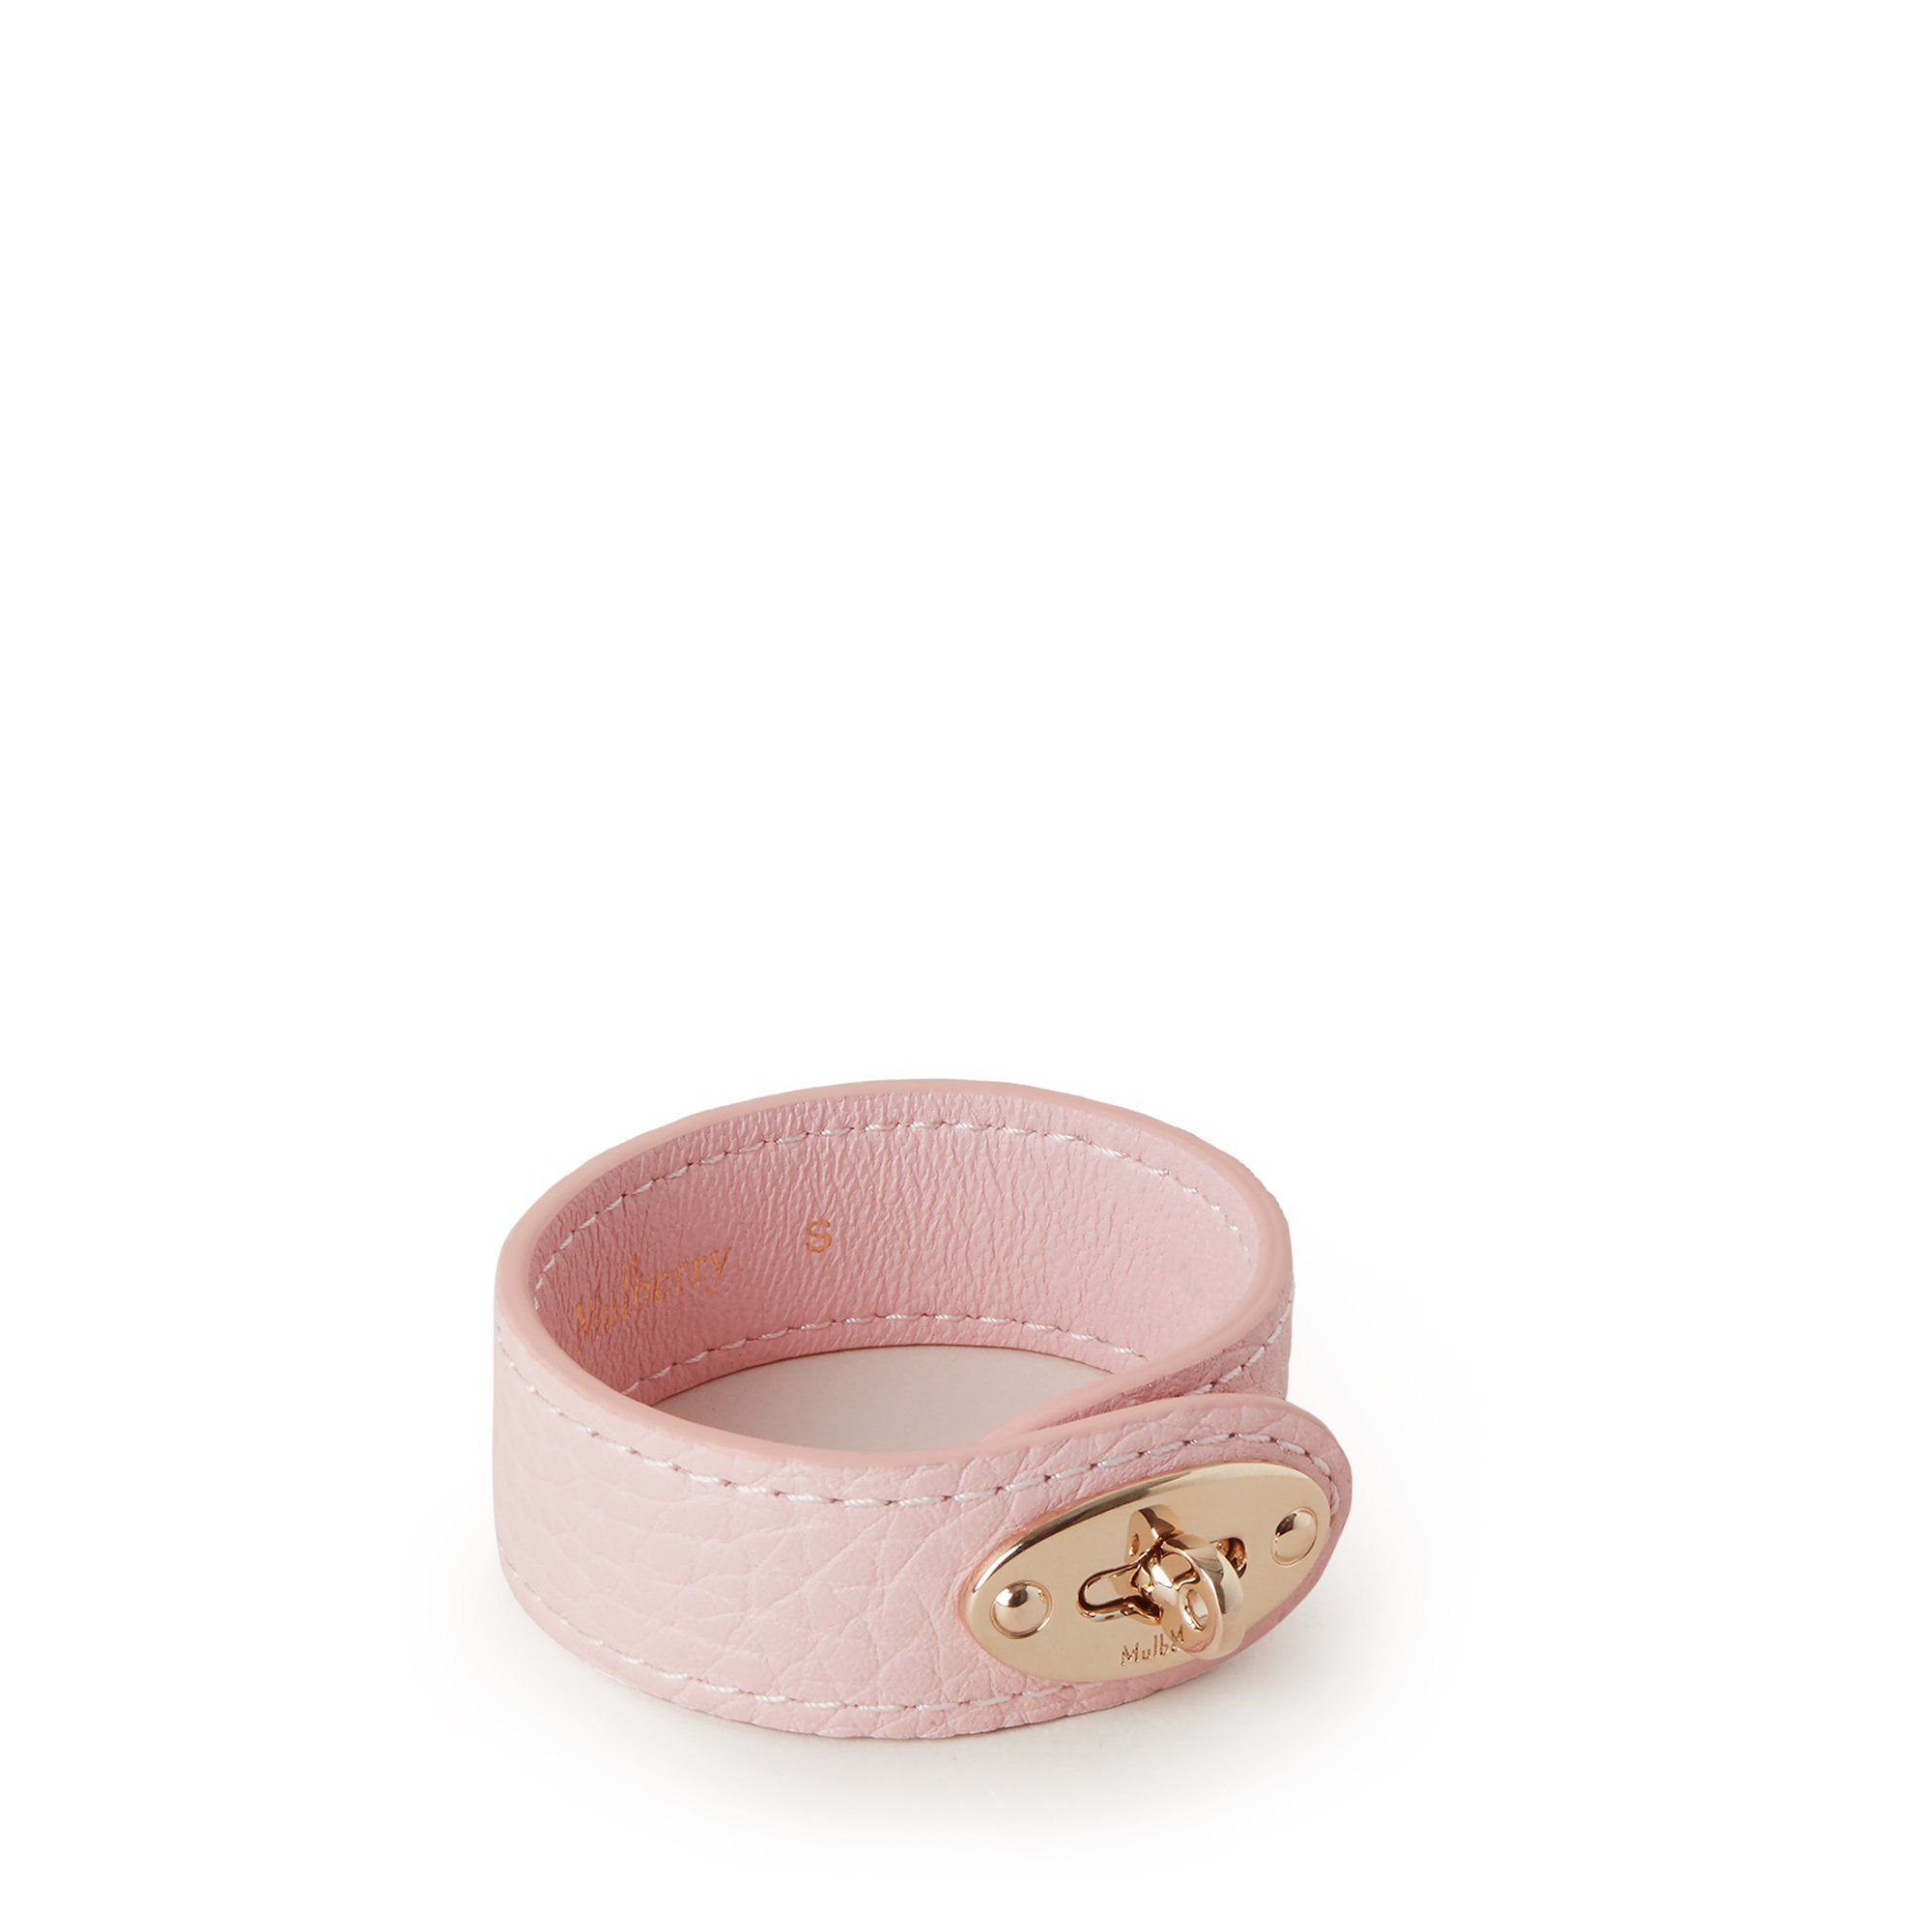 Mulberry Bayswater Leather Bracelet In Icy Pink